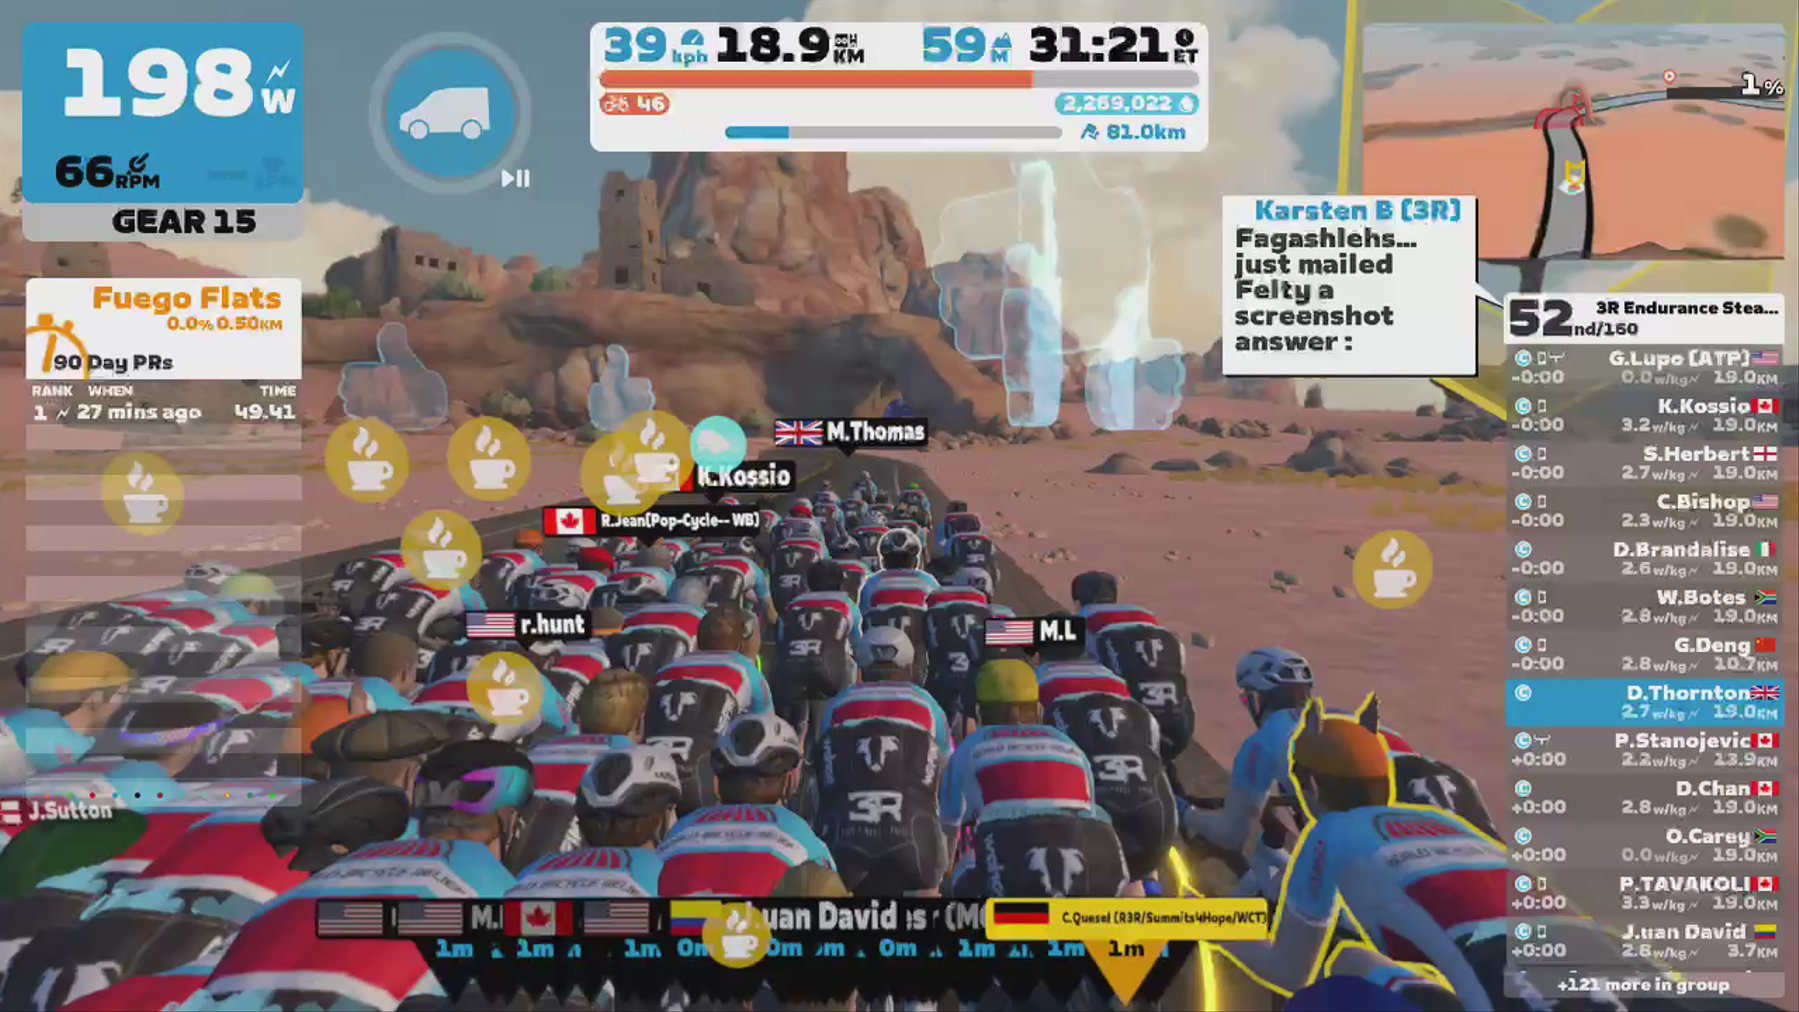 Zwift - Group Ride: 3R Endurance Steady Ride (C) on Tick Tock in Watopia